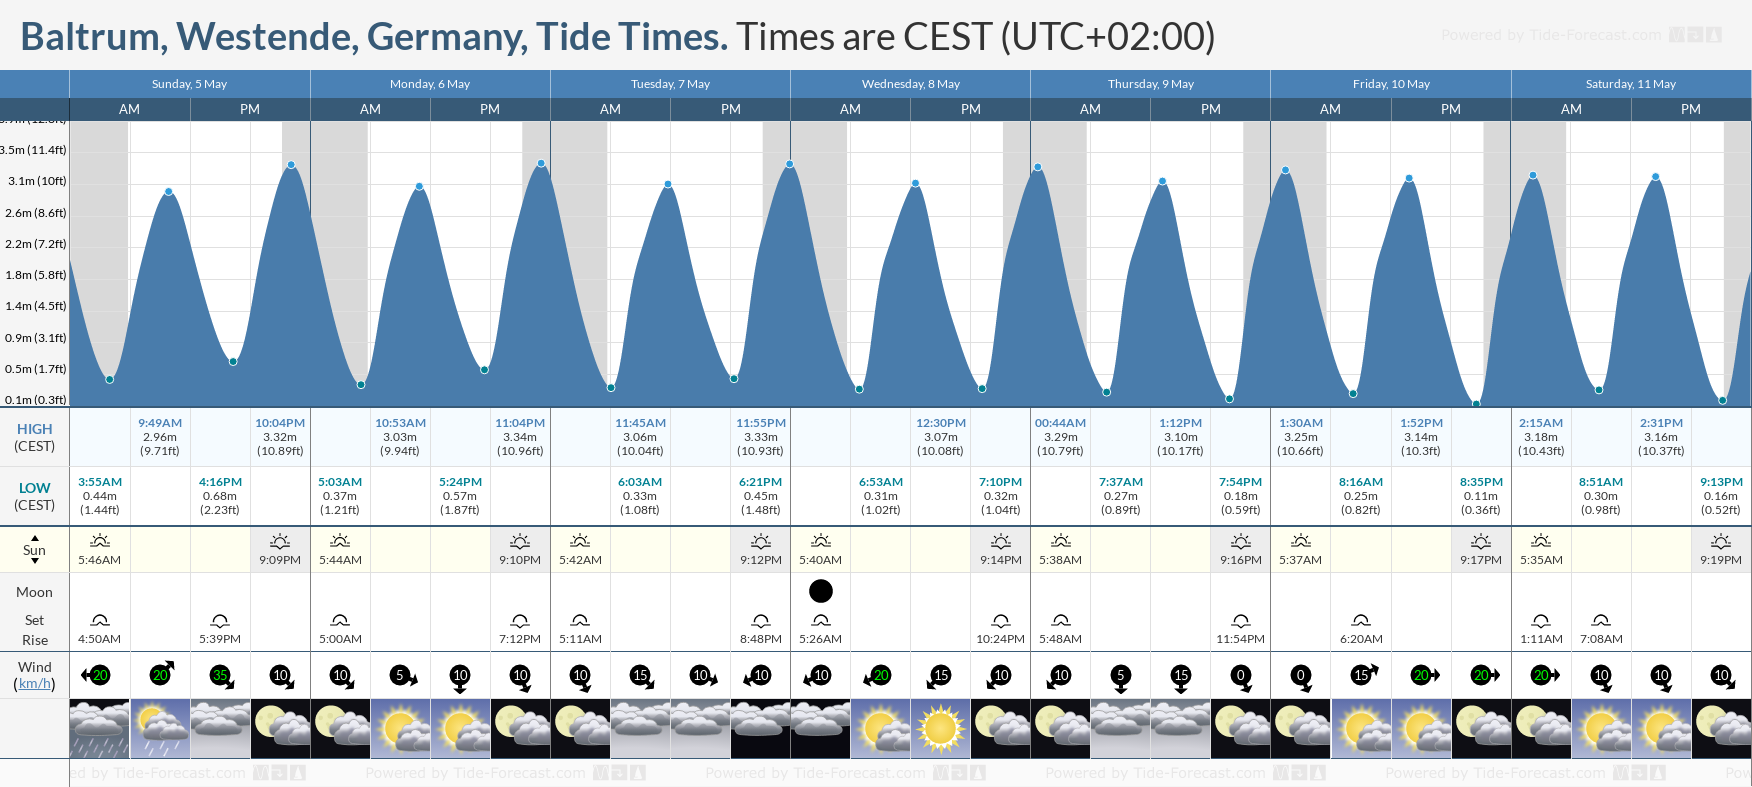 Baltrum, Westende, Germany Tide Chart including high and low tide tide times for the next 7 days